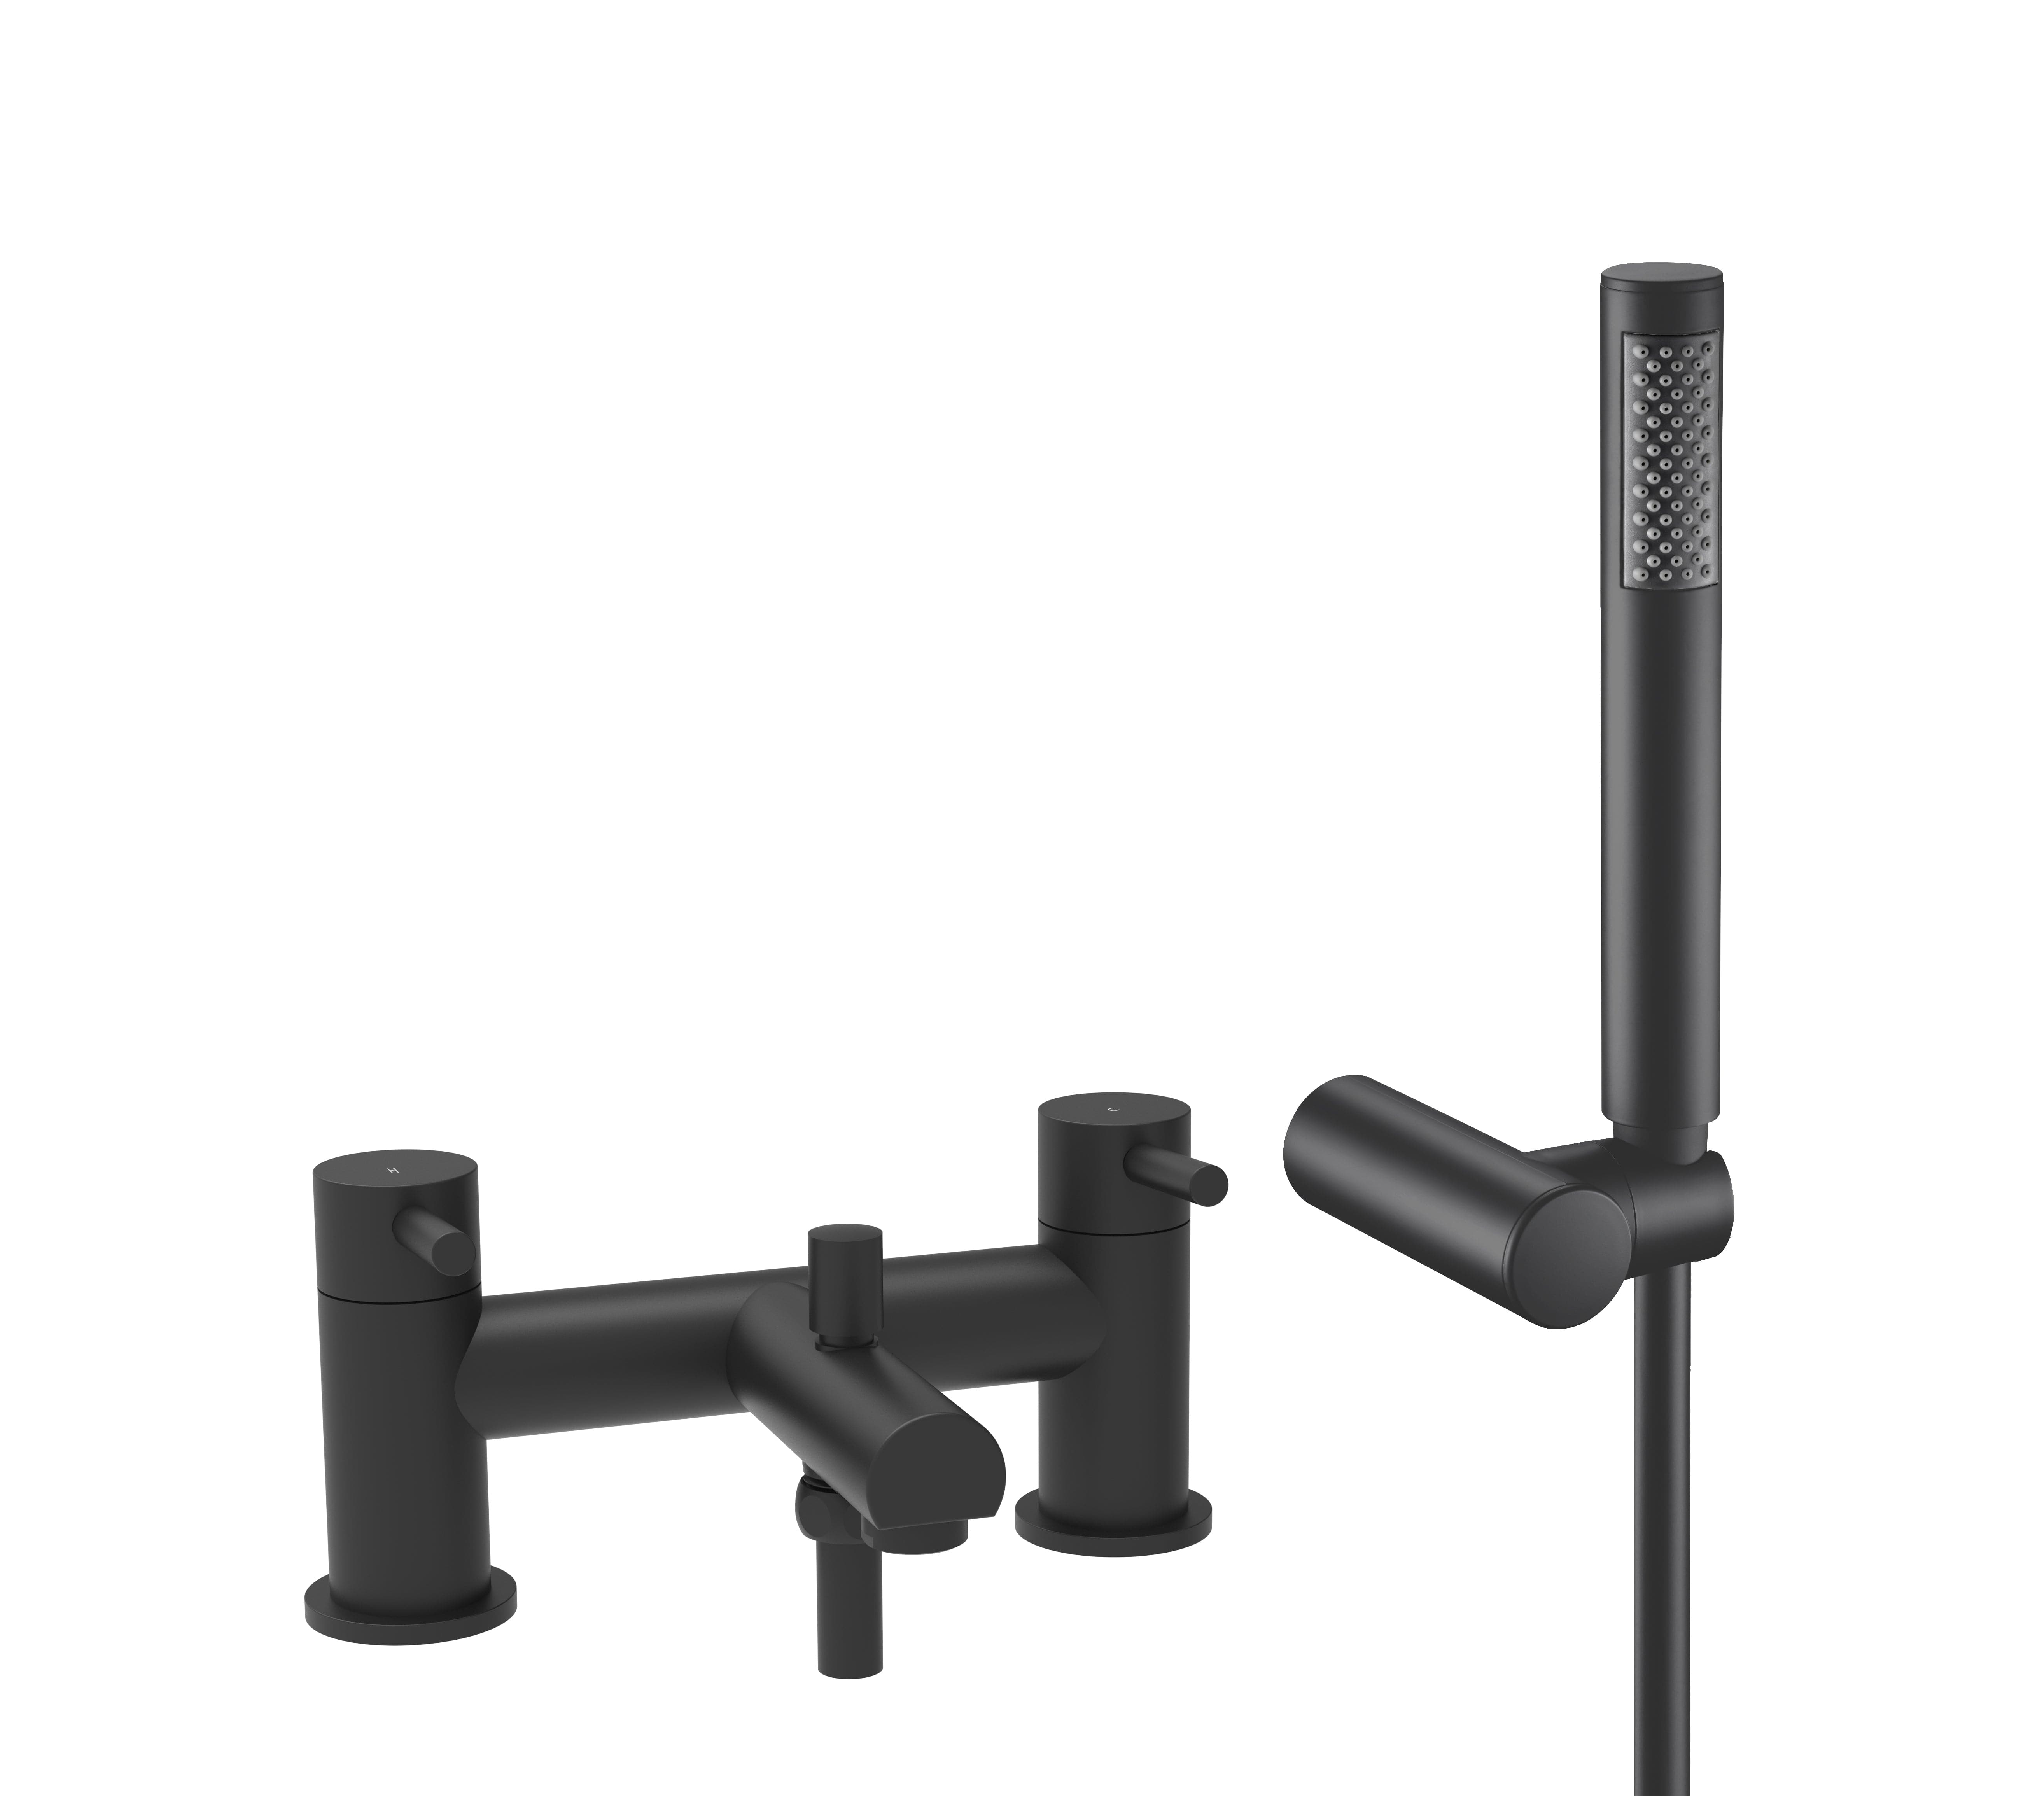 Dixon Round Lever Bath Shower Mixer Tap with Kit - Matt Black finish, modern and stylish, perfect for contemporary bathrooms. Upgrade your bathroom with this sleek tap.